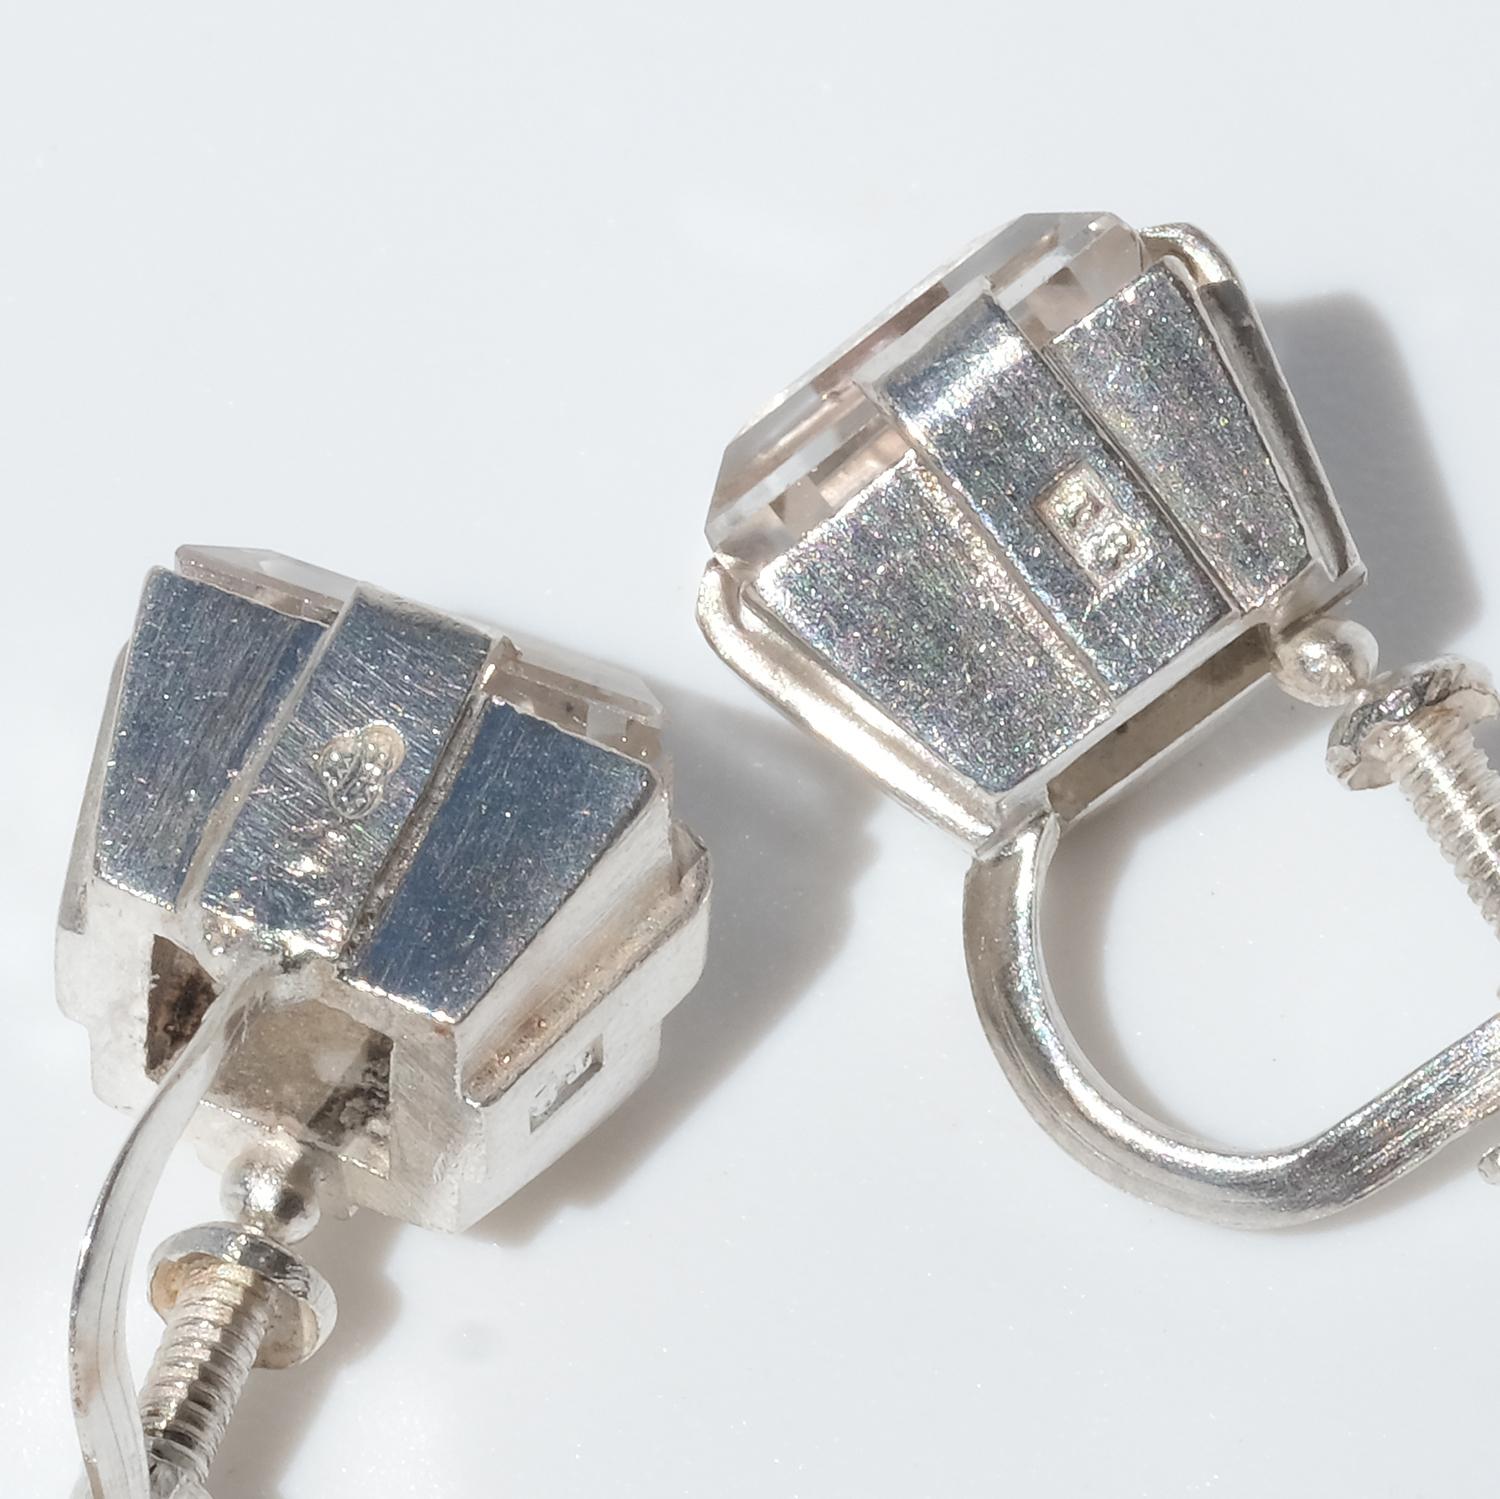 Pair of Earrings, Silver with Rock Crystals, Made in 1945 in Stockholm Sweden For Sale 4